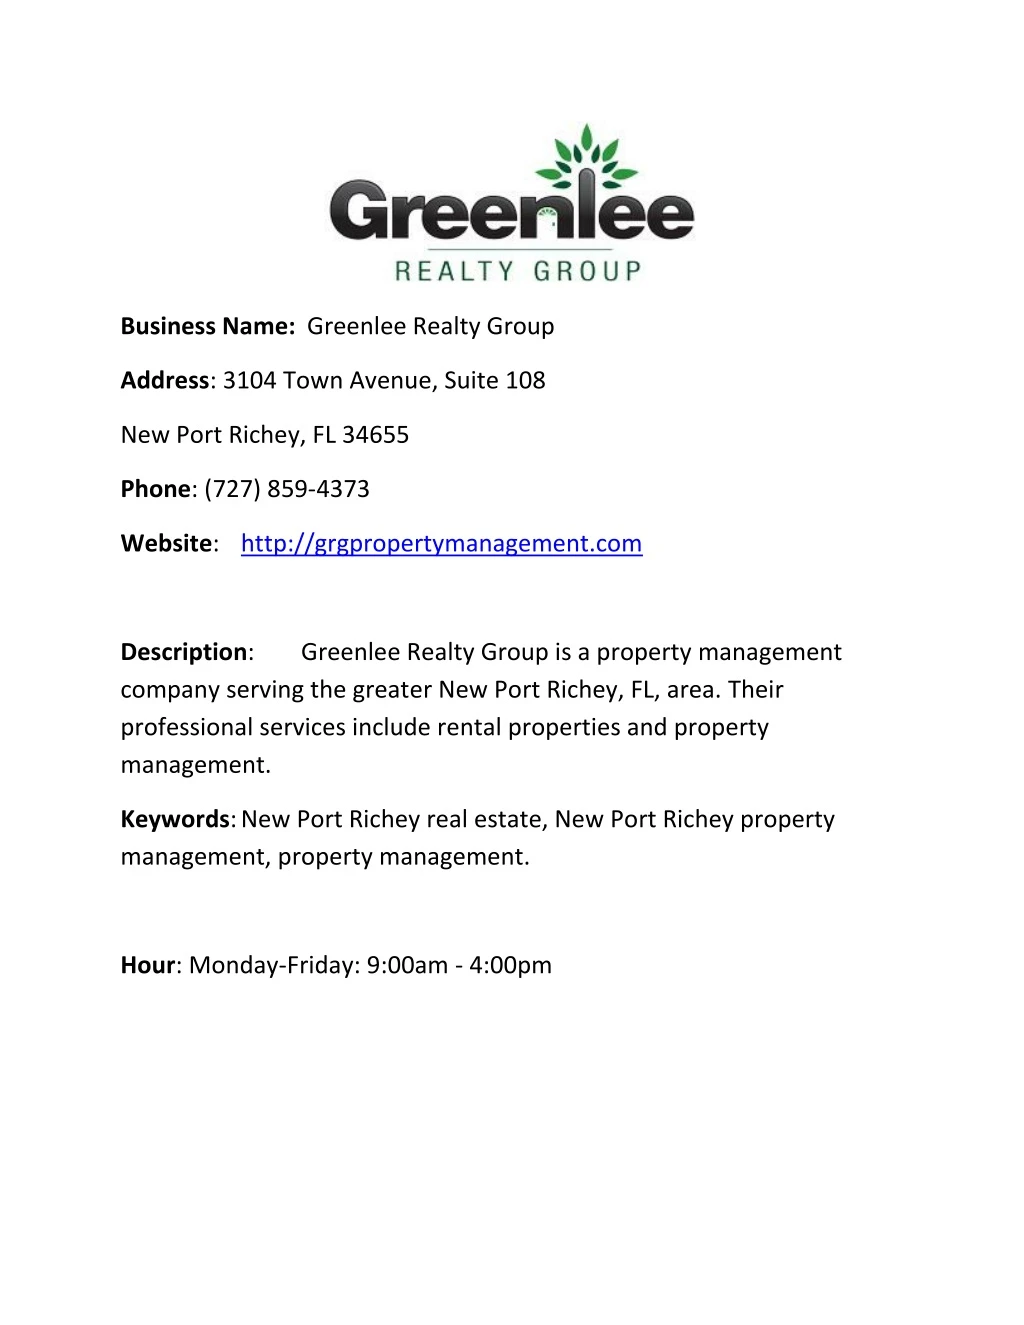 business name greenlee realty group